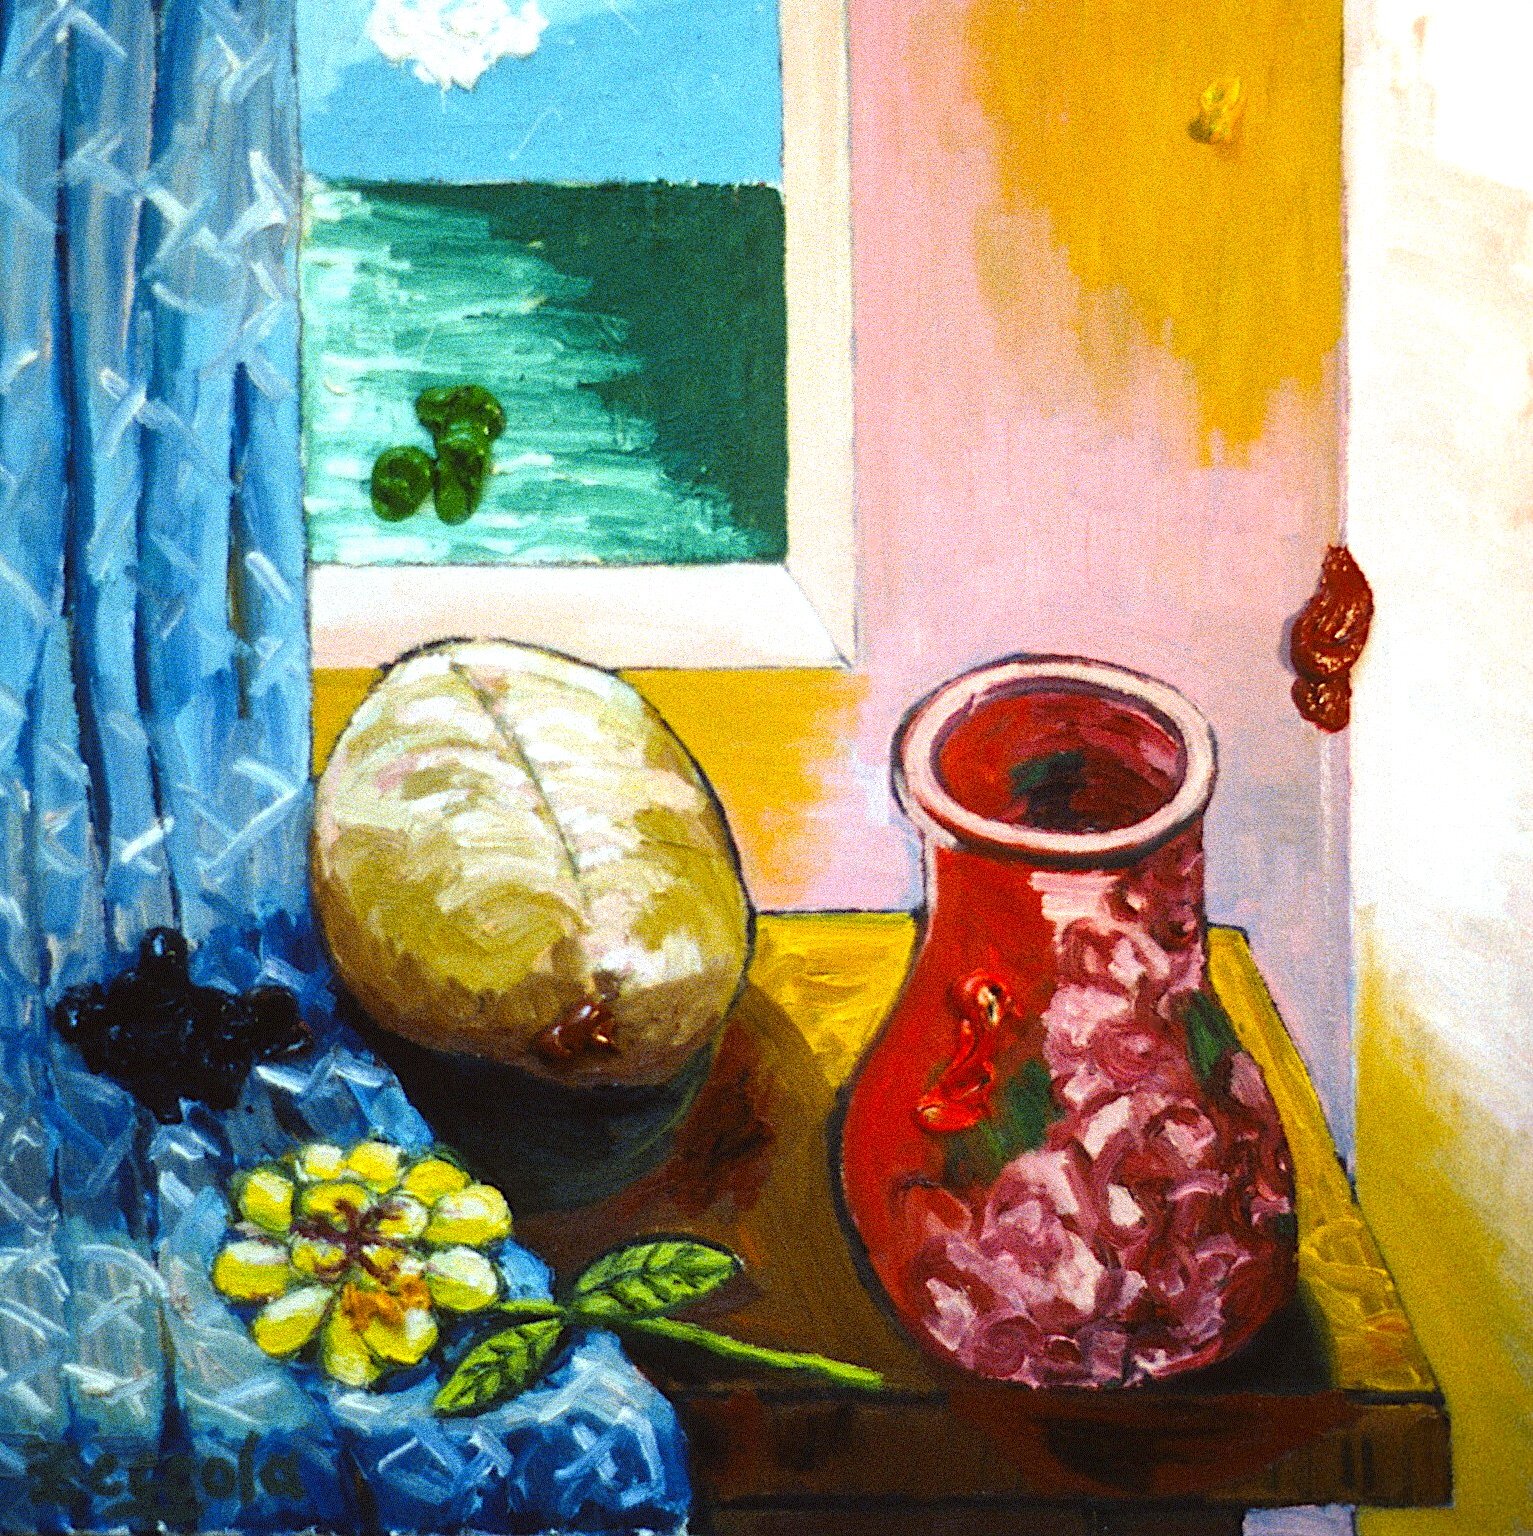 Bread and Wine, 2005. Oil, acrylic on canvas. 26” x 26”.